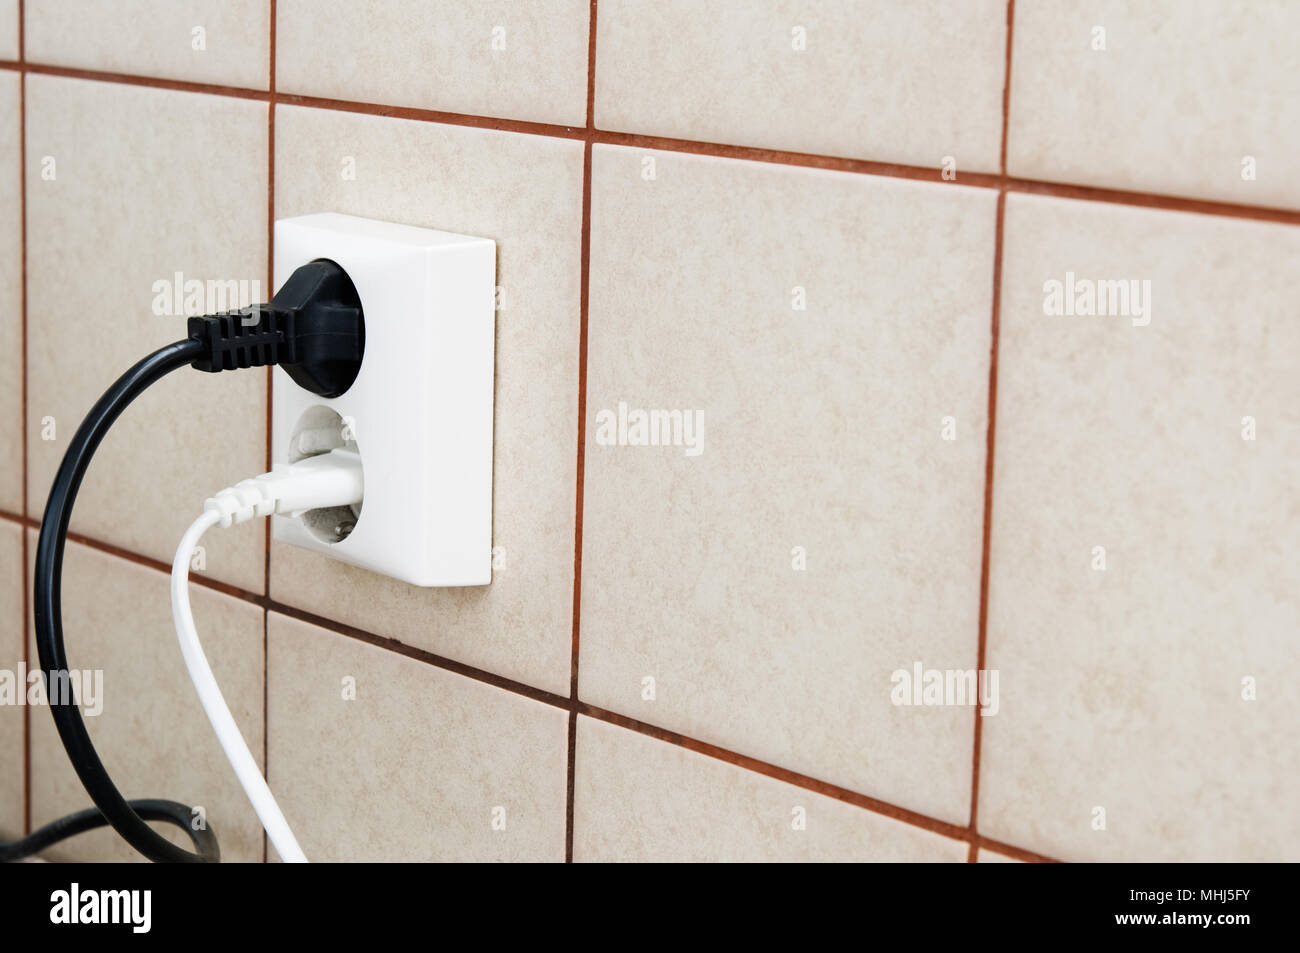 Plugs connected to the outlet in a wall. Stock Photo